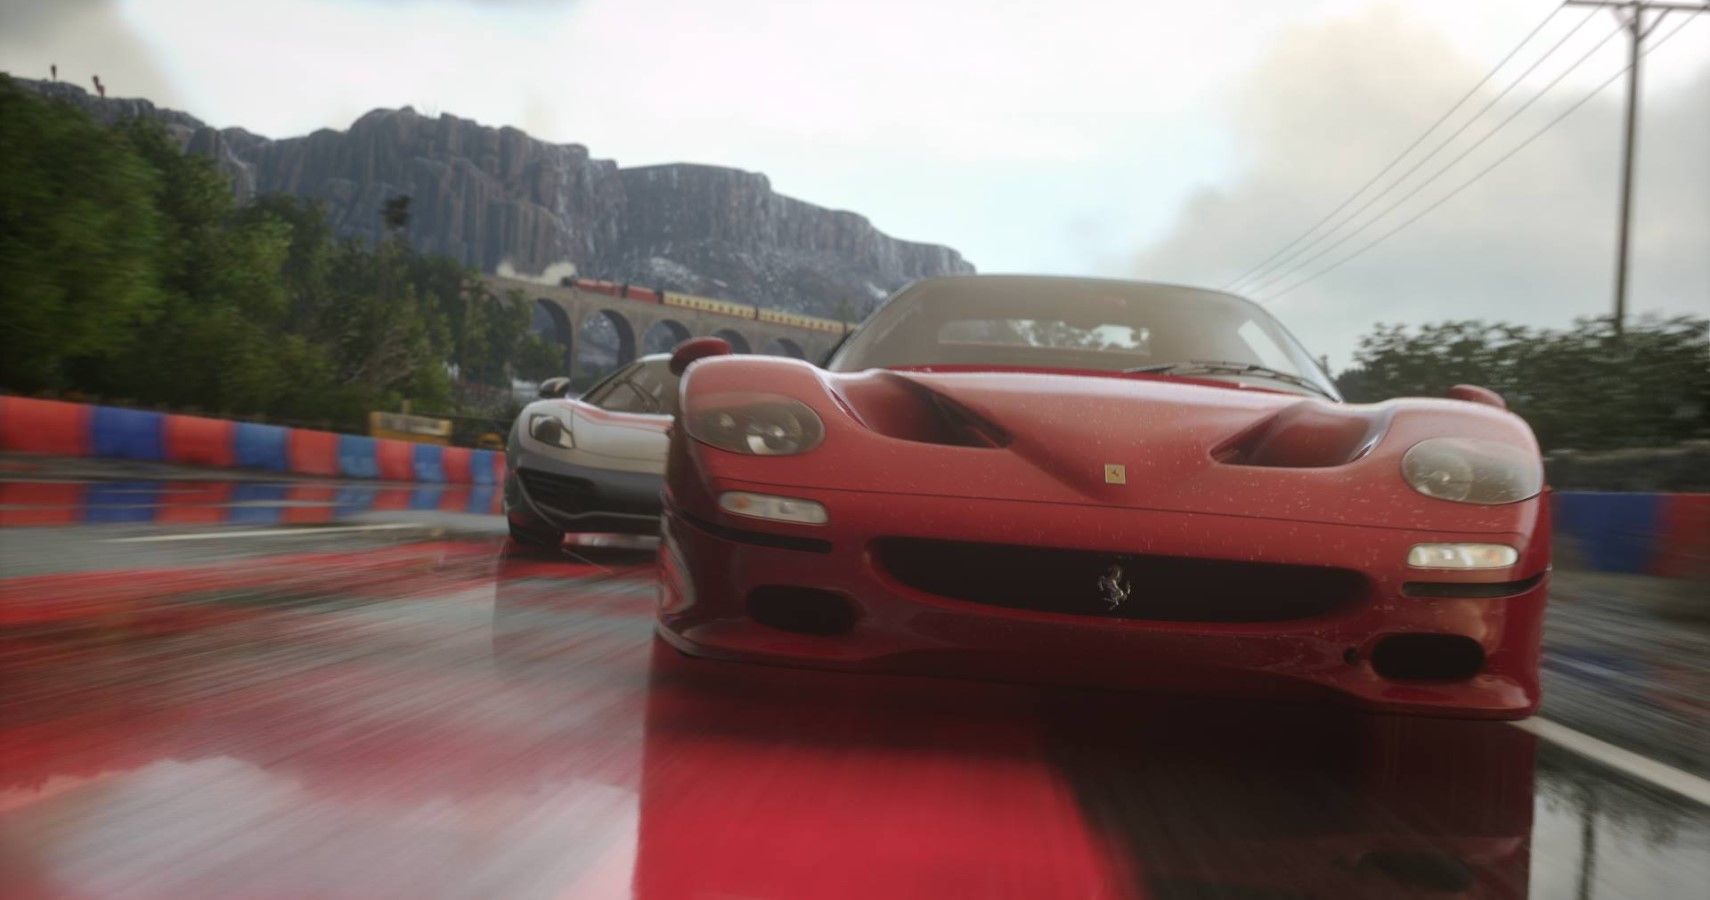 DriveClub in-game action scene with Ferrari